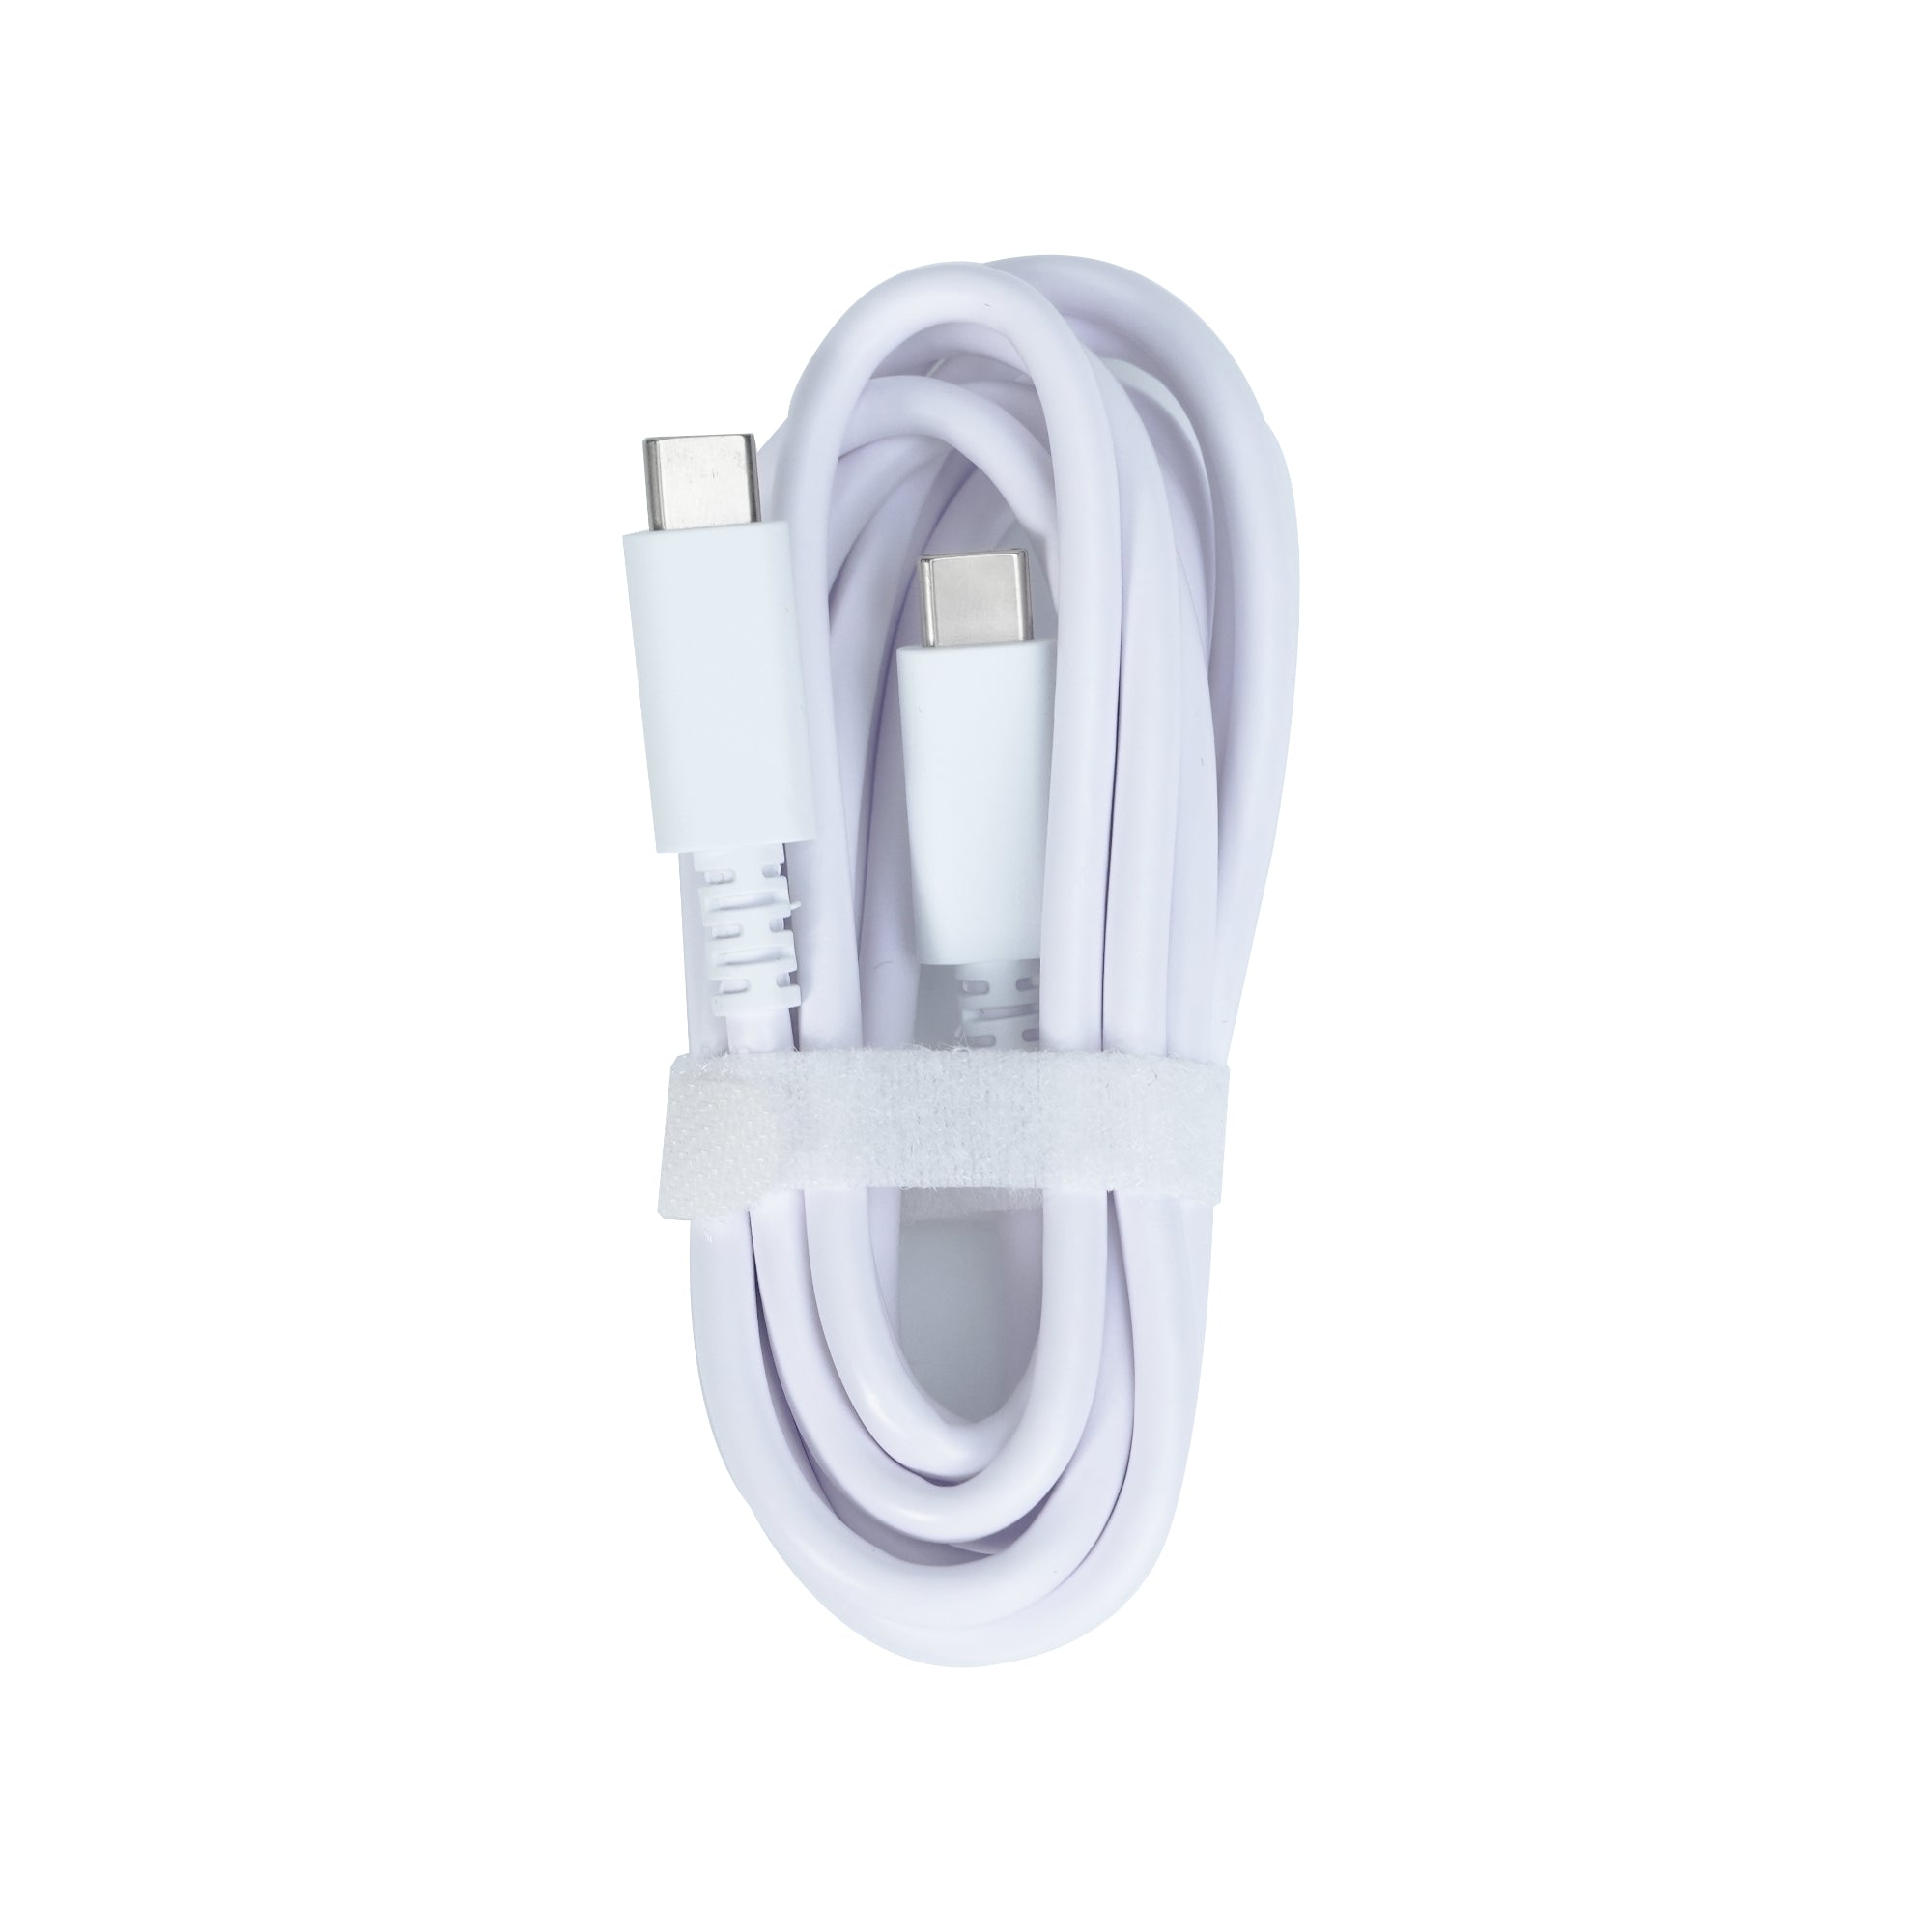 USB Type-C to C Cable for MIRACO, MIRACO PRO